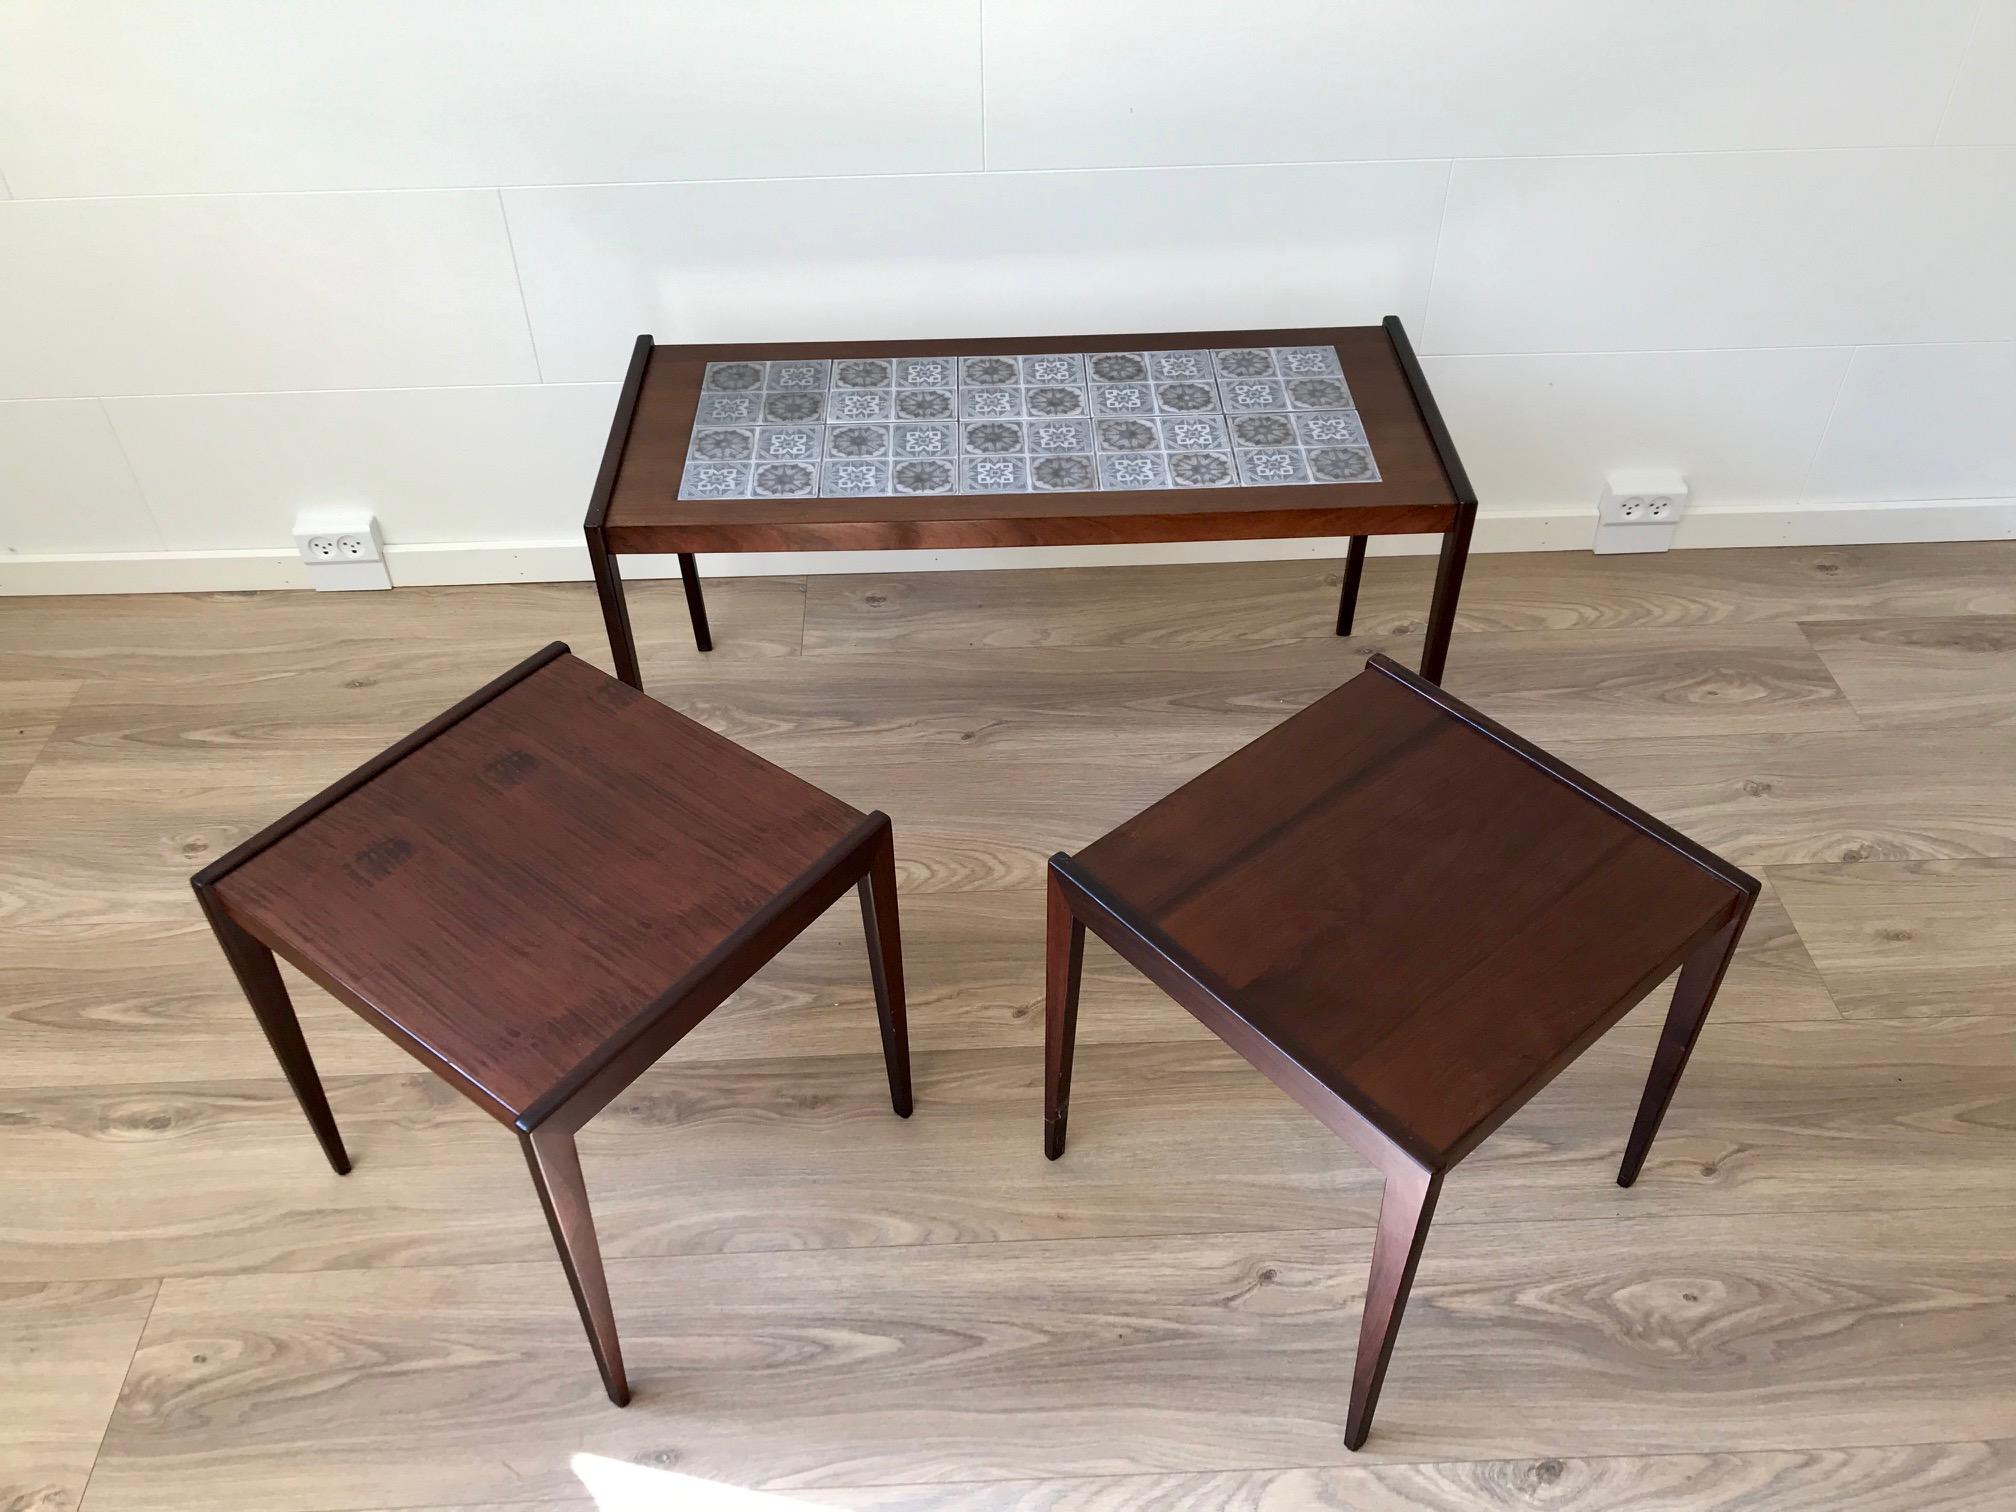 A nest of tables fashioned from teak and dark oak. The rectangular main table has inlaid tiles from Royal Copenhagen. Very practical if used as a coffee table group since the tiles allows wet and hot drinks etc. being served without any protection.